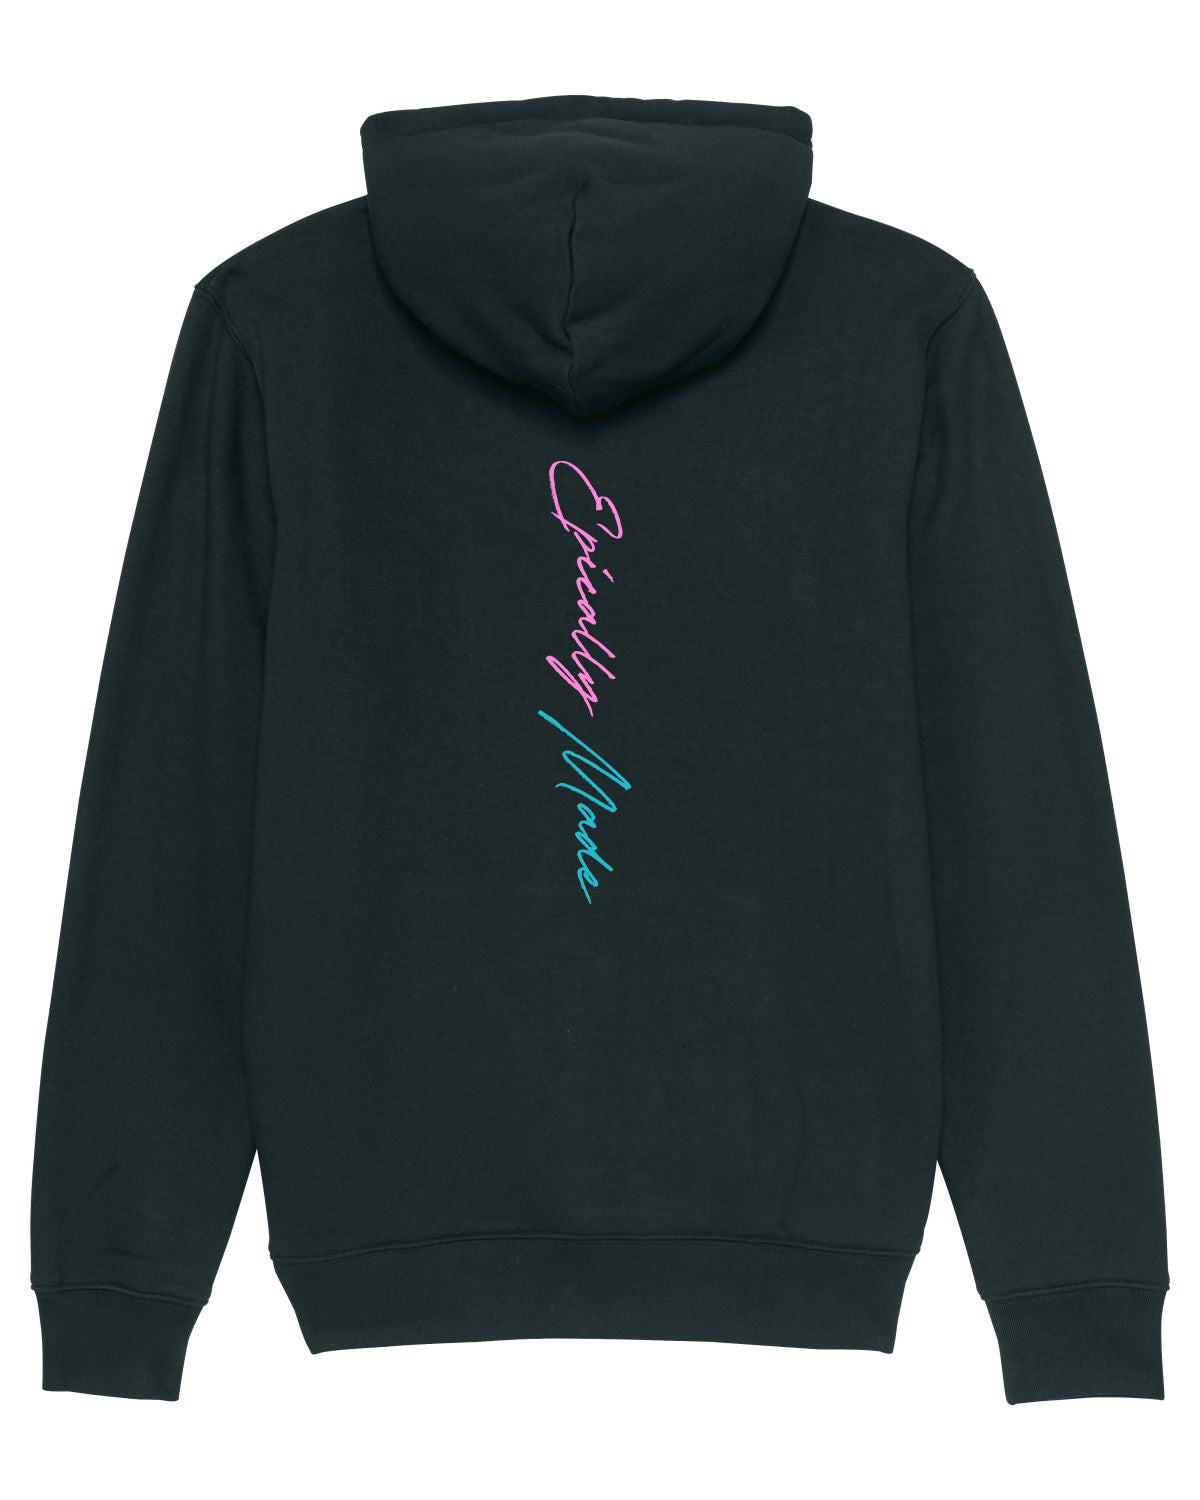 "Retro Collection" Pullover Hoodie